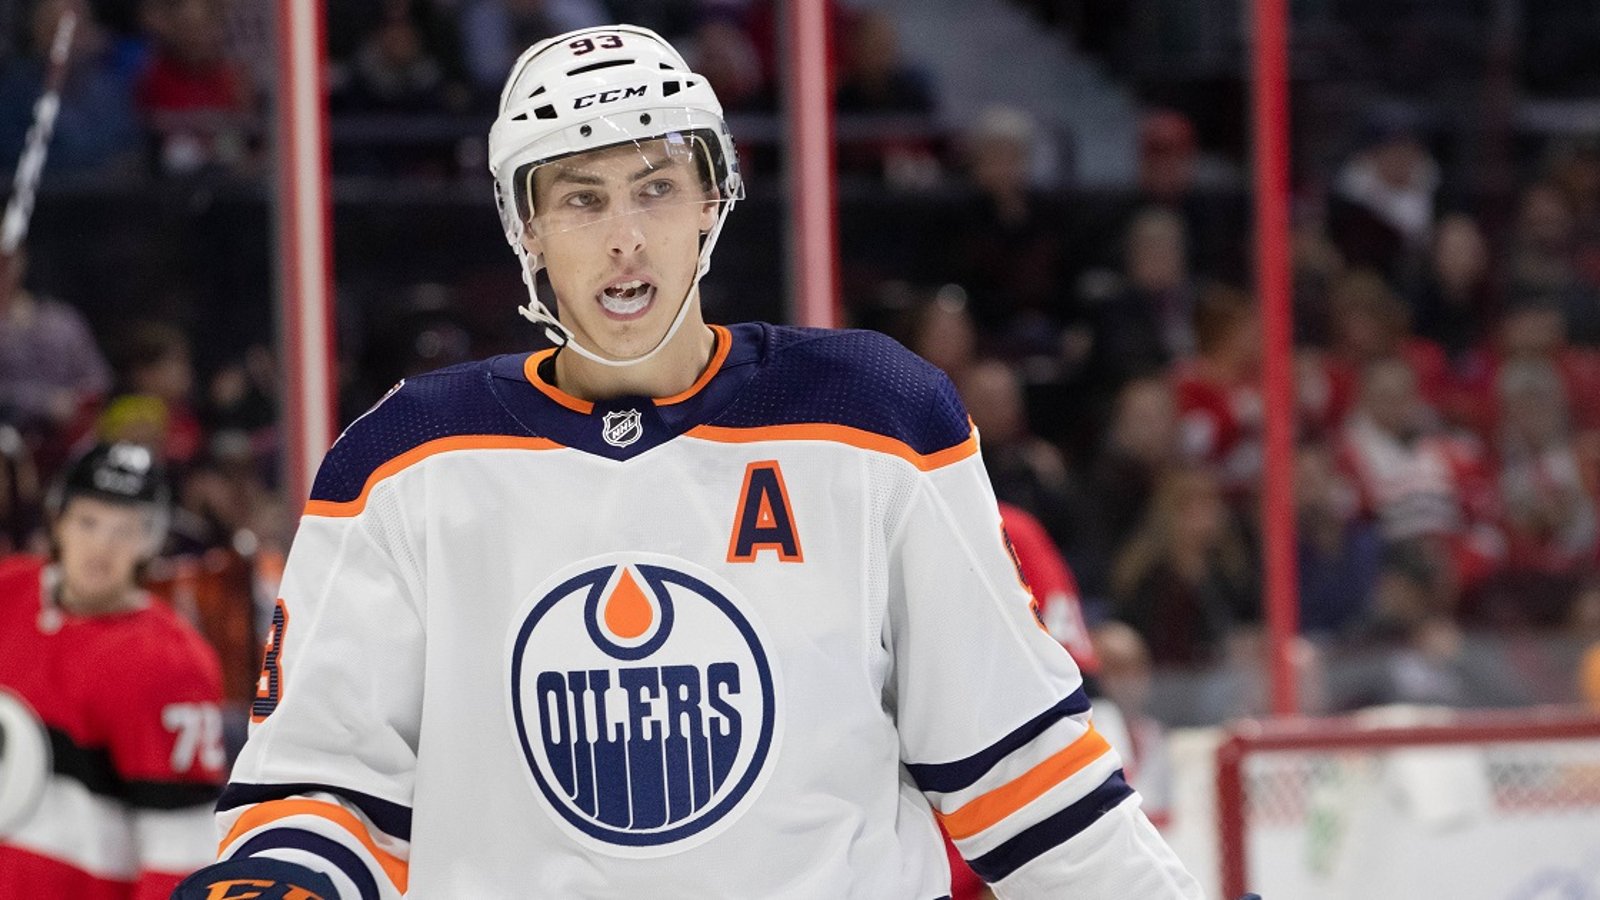 Oilers announce Ryan Nugent-Hopkins has been injured.